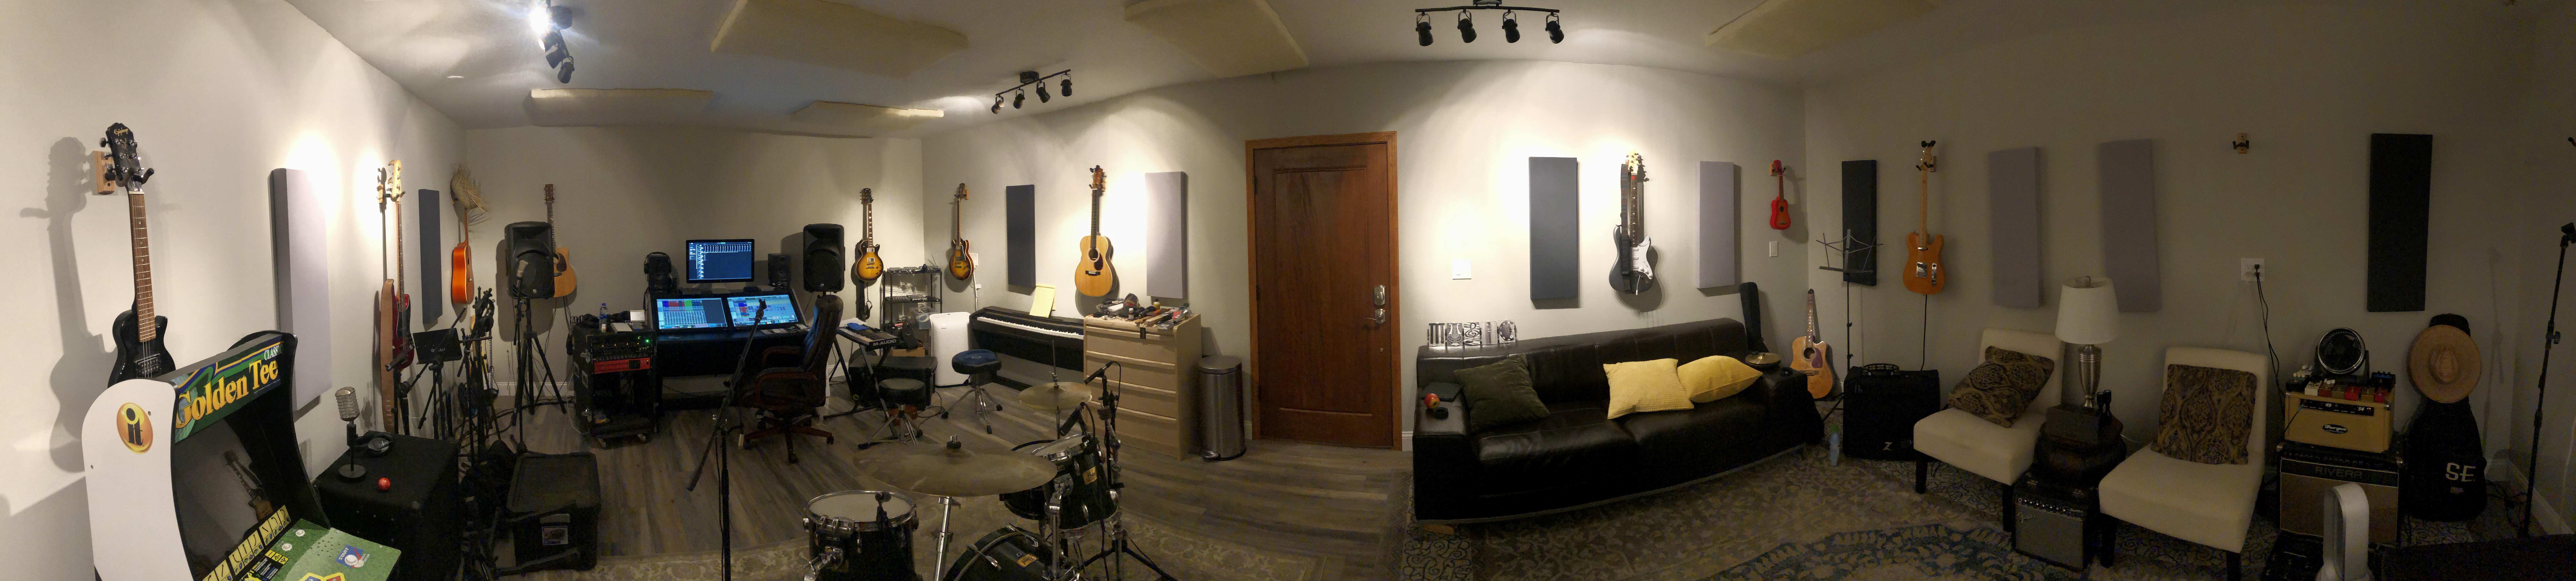 This is a panoramic shot of studios right after finishing construction